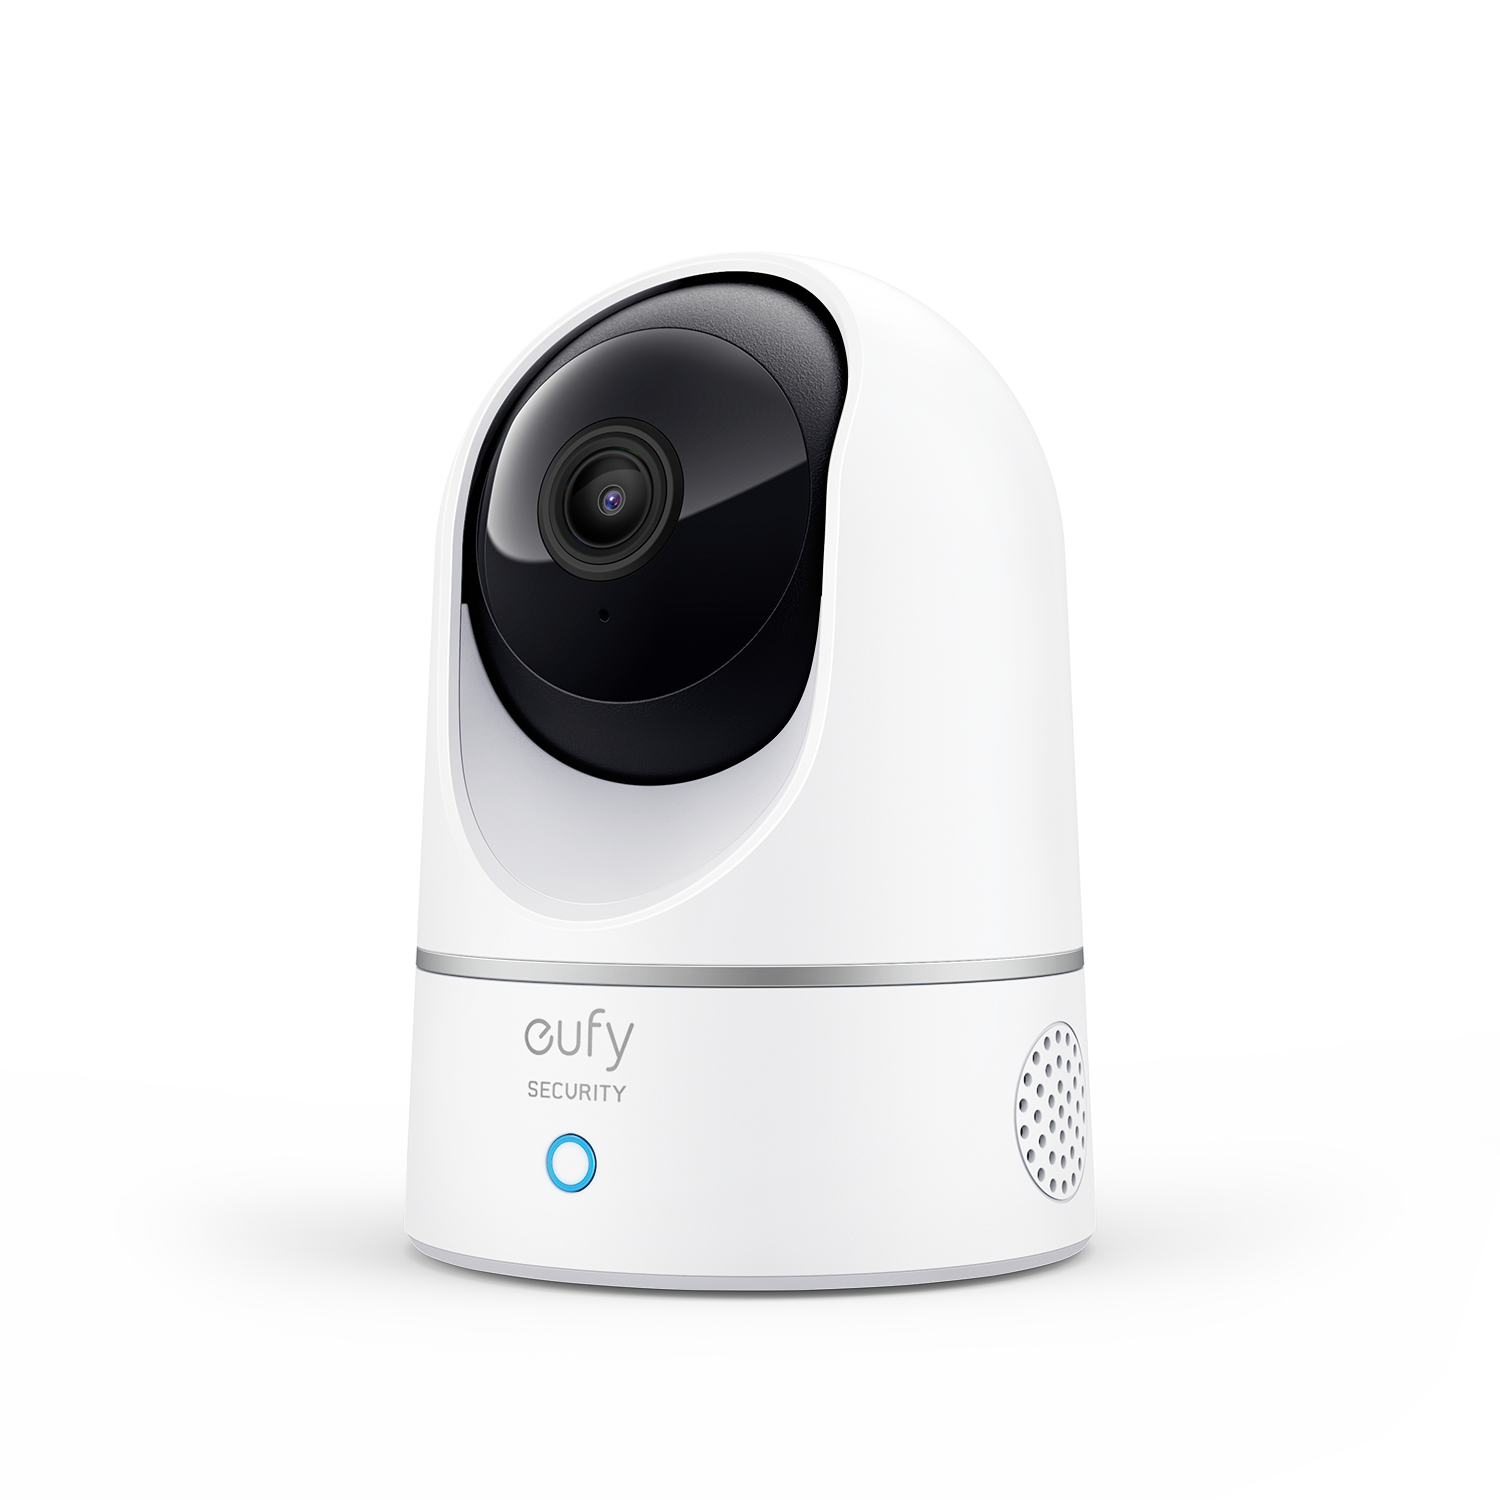 Anker eufy Security 360 Degree Rotatable 2K HD Night Vision IP Security Camera